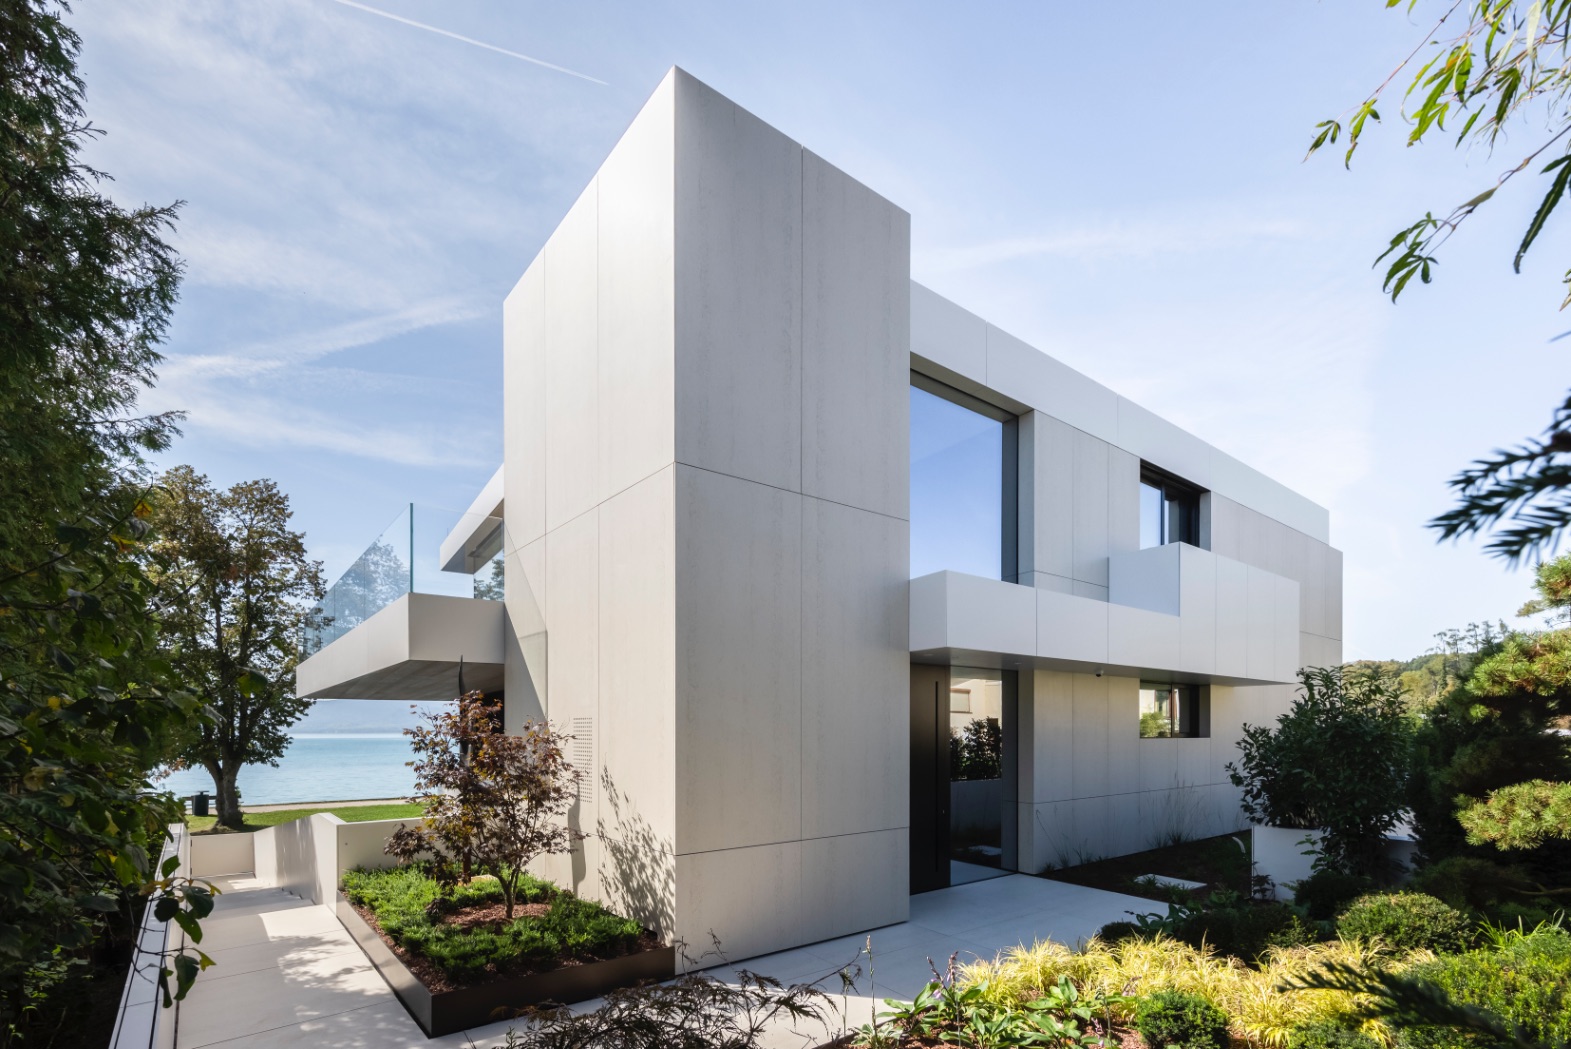 Image of EFHH 1 in Façades and flooring enhance the design of this semi-detached Mediterranean villa with two dwellings  - Cosentino